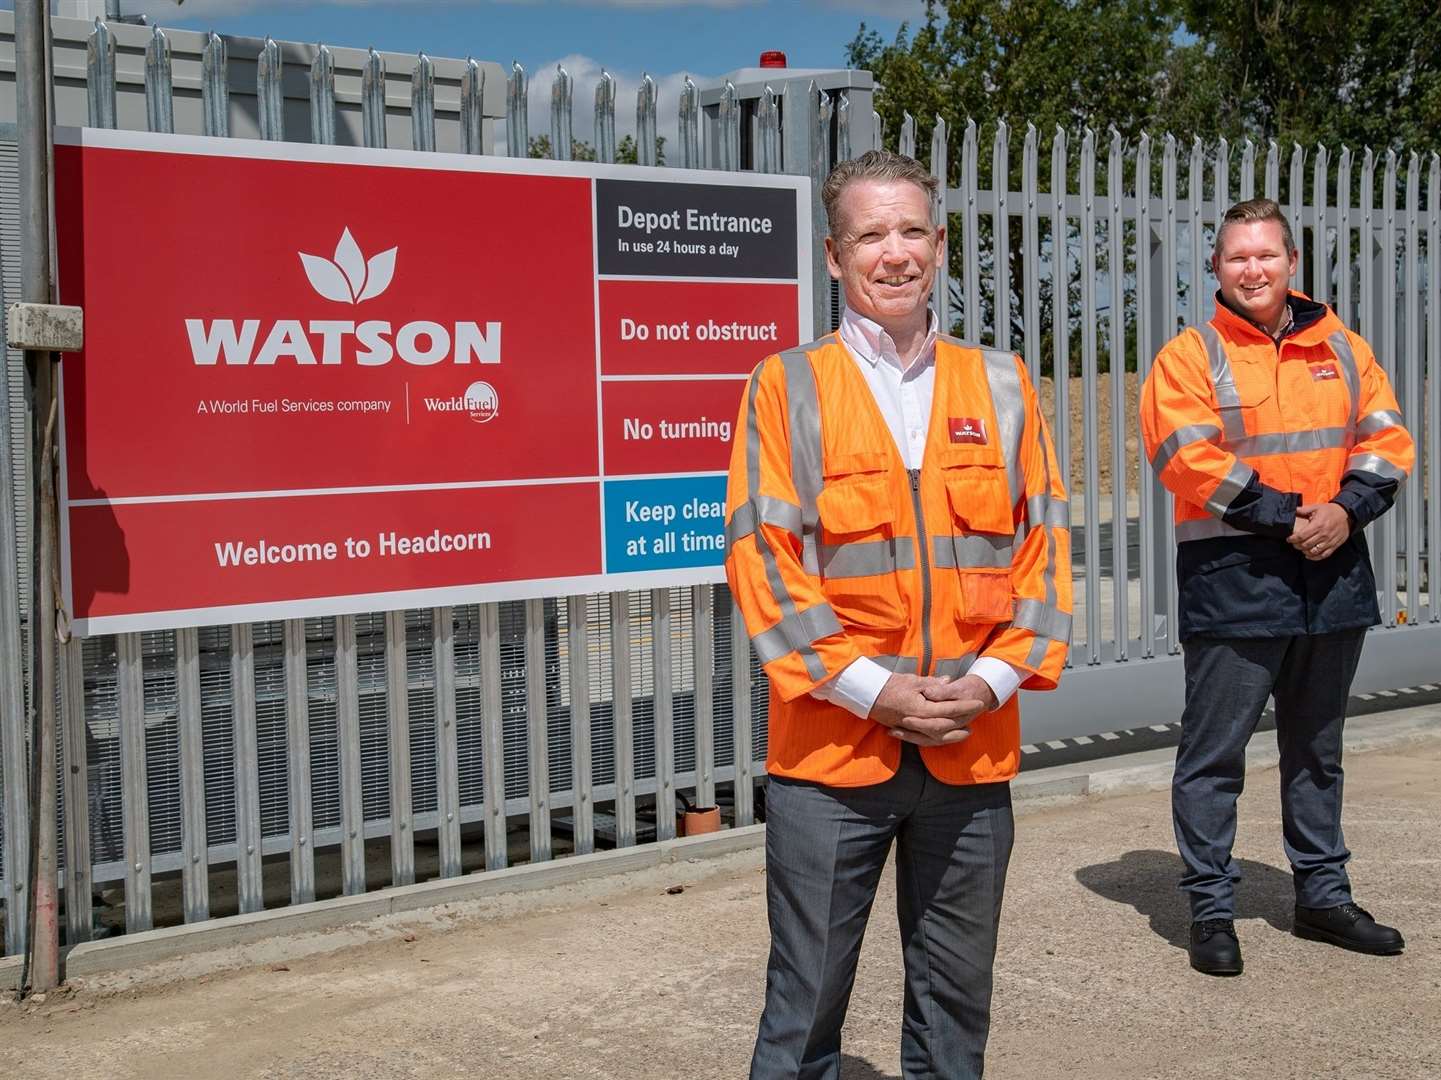 Malcolm Atkins, the physical operations manager with Watson Fuels, and Craig Hallam, the regional commercial manager